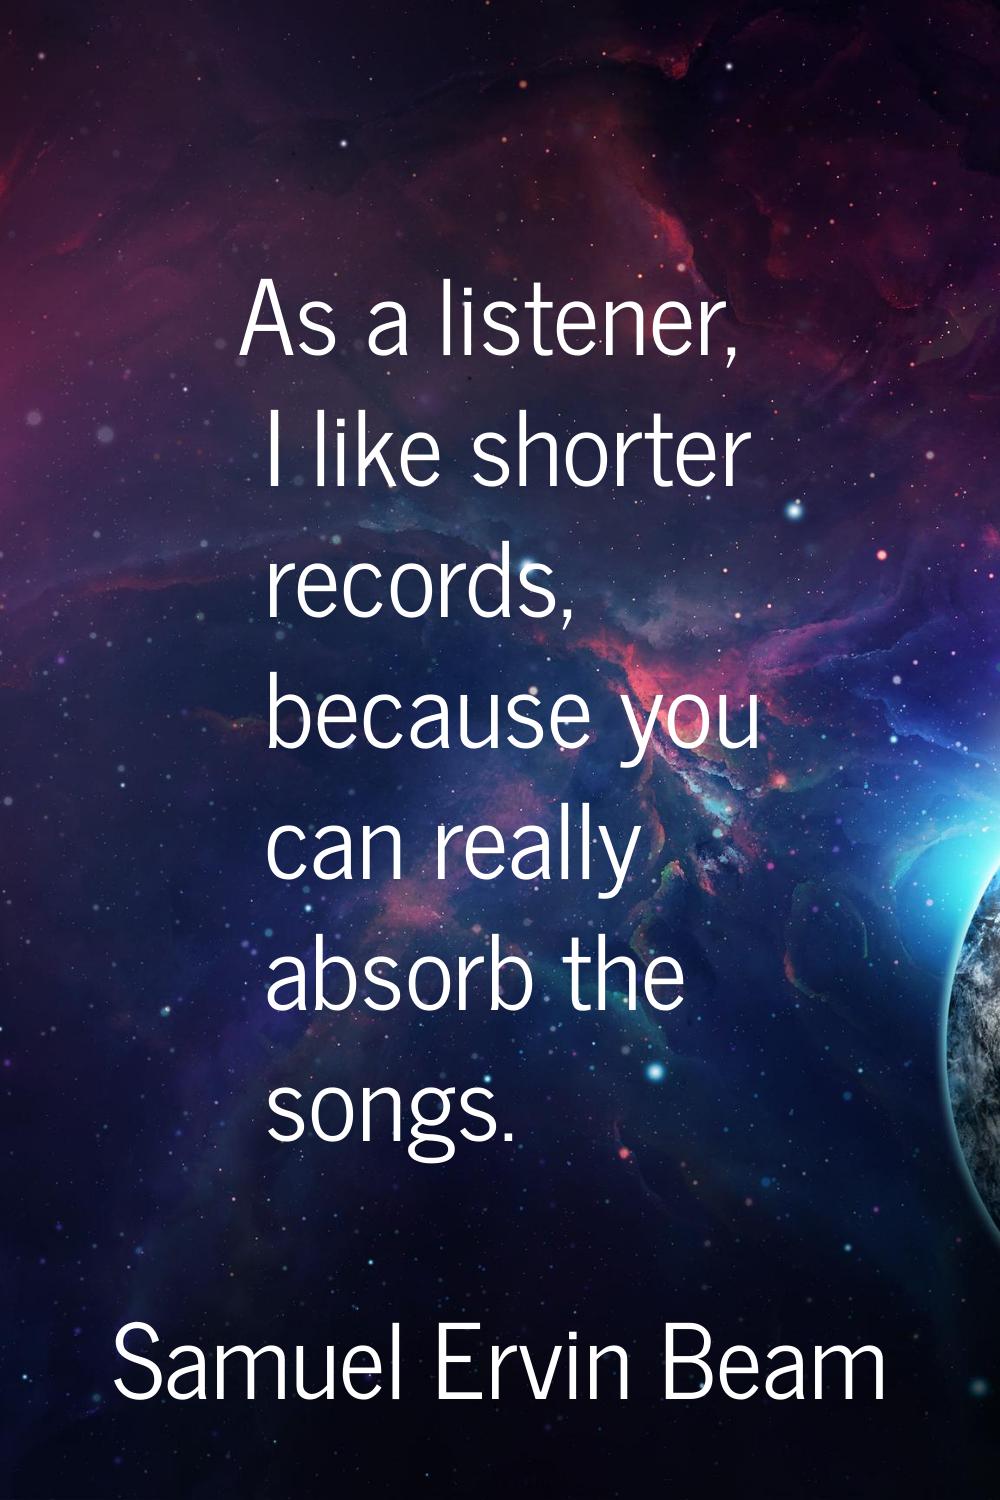 As a listener, I like shorter records, because you can really absorb the songs.